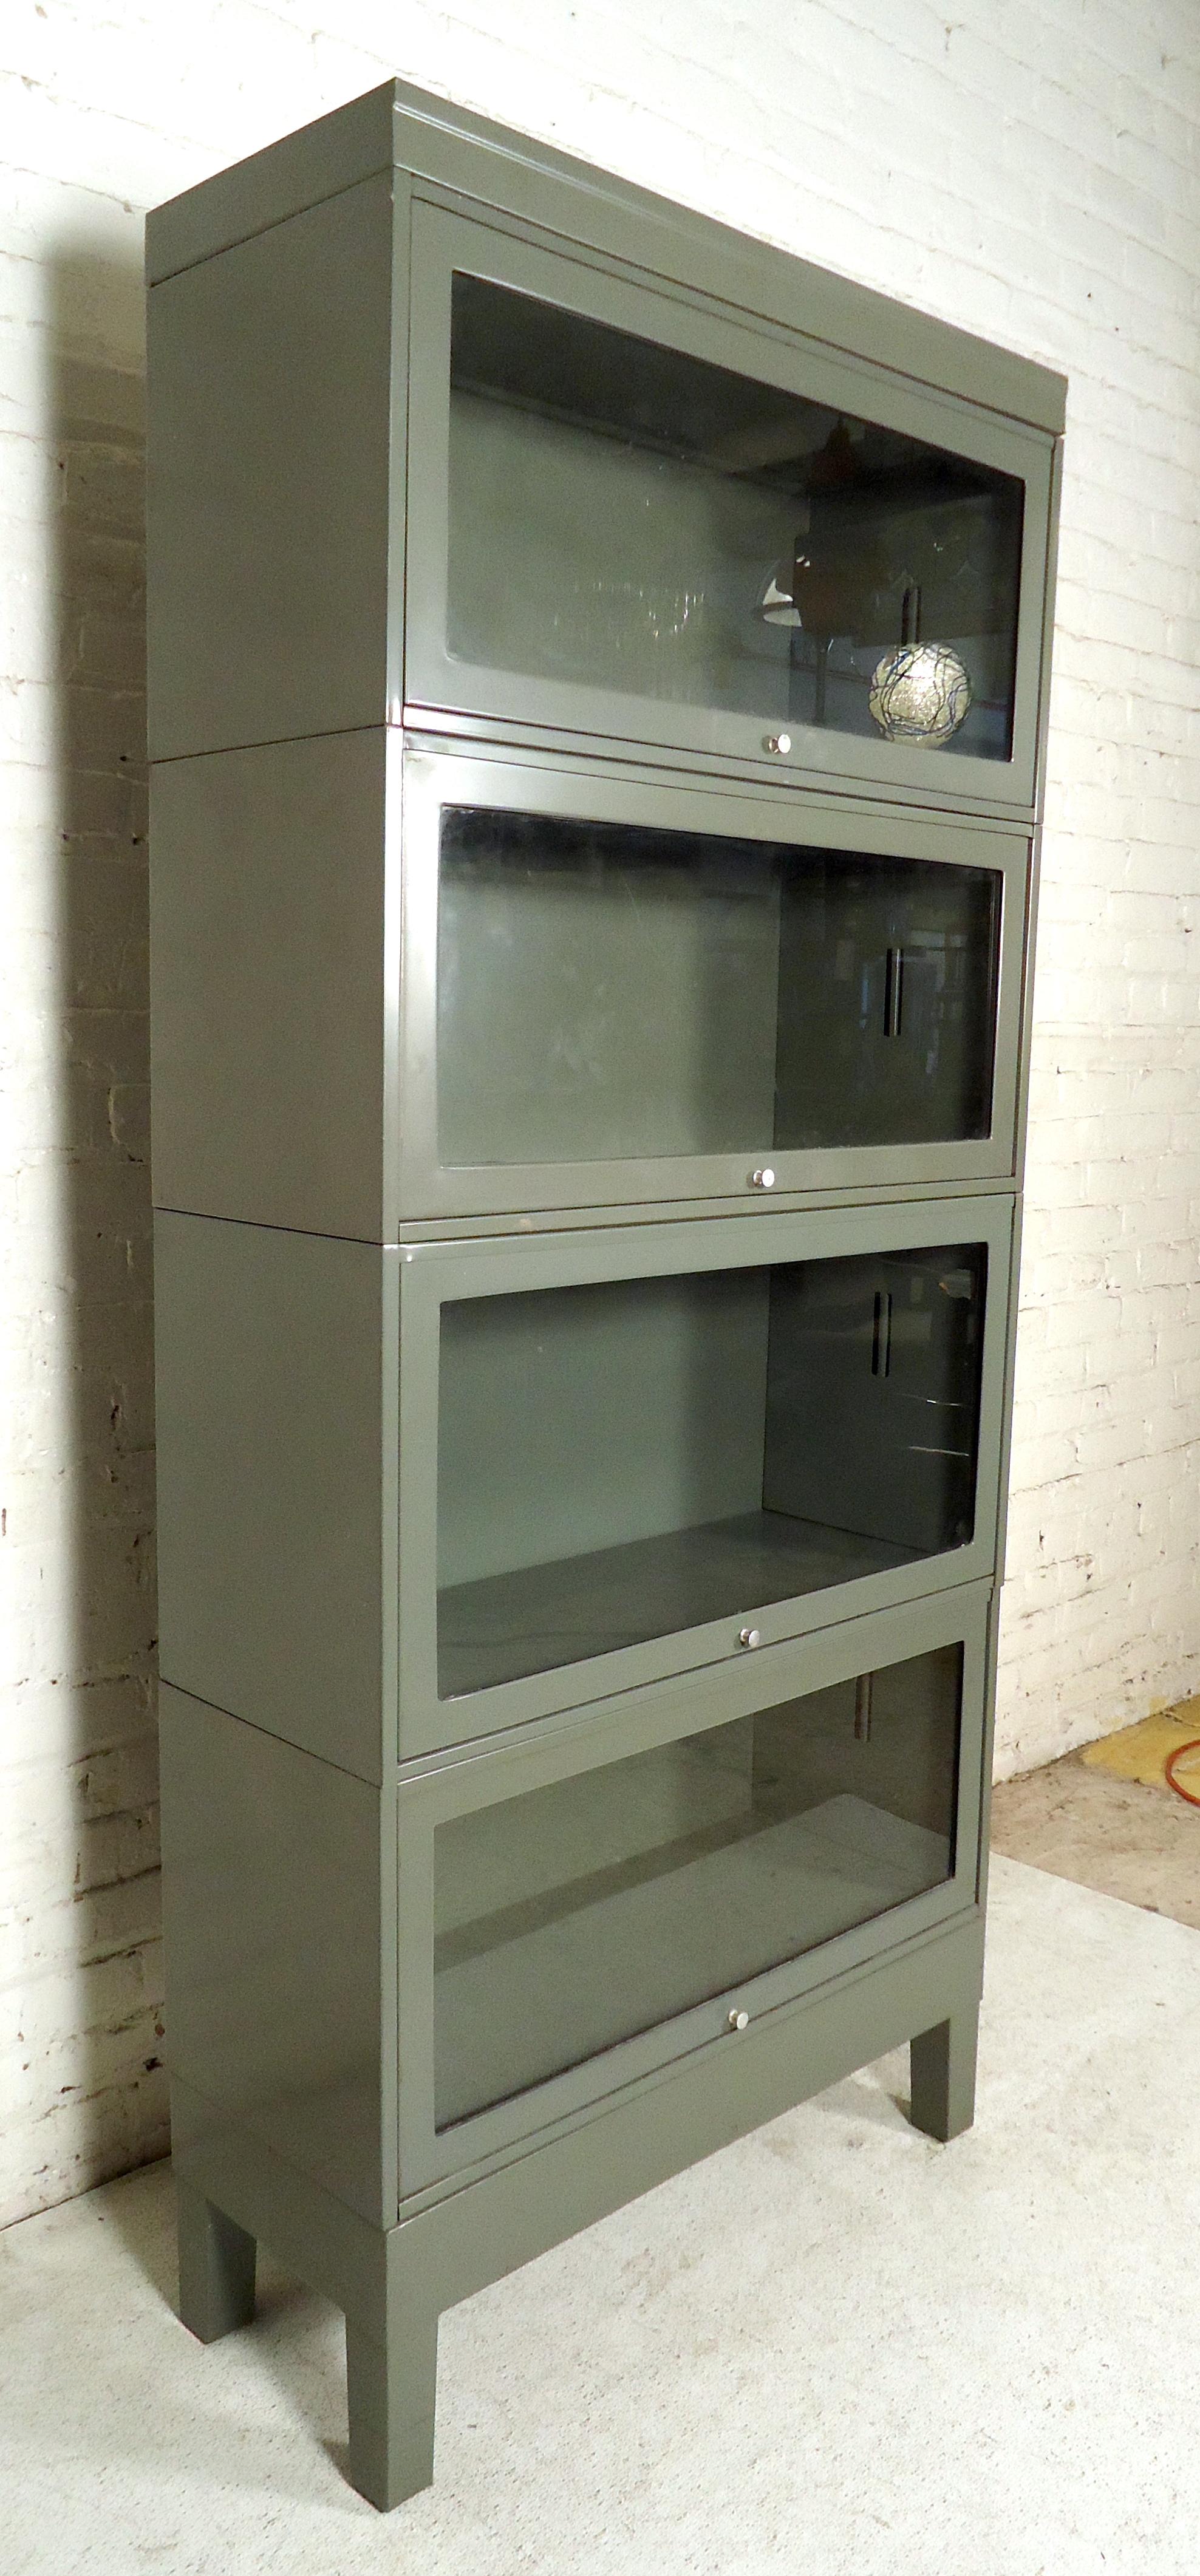 barrister bookcase metal